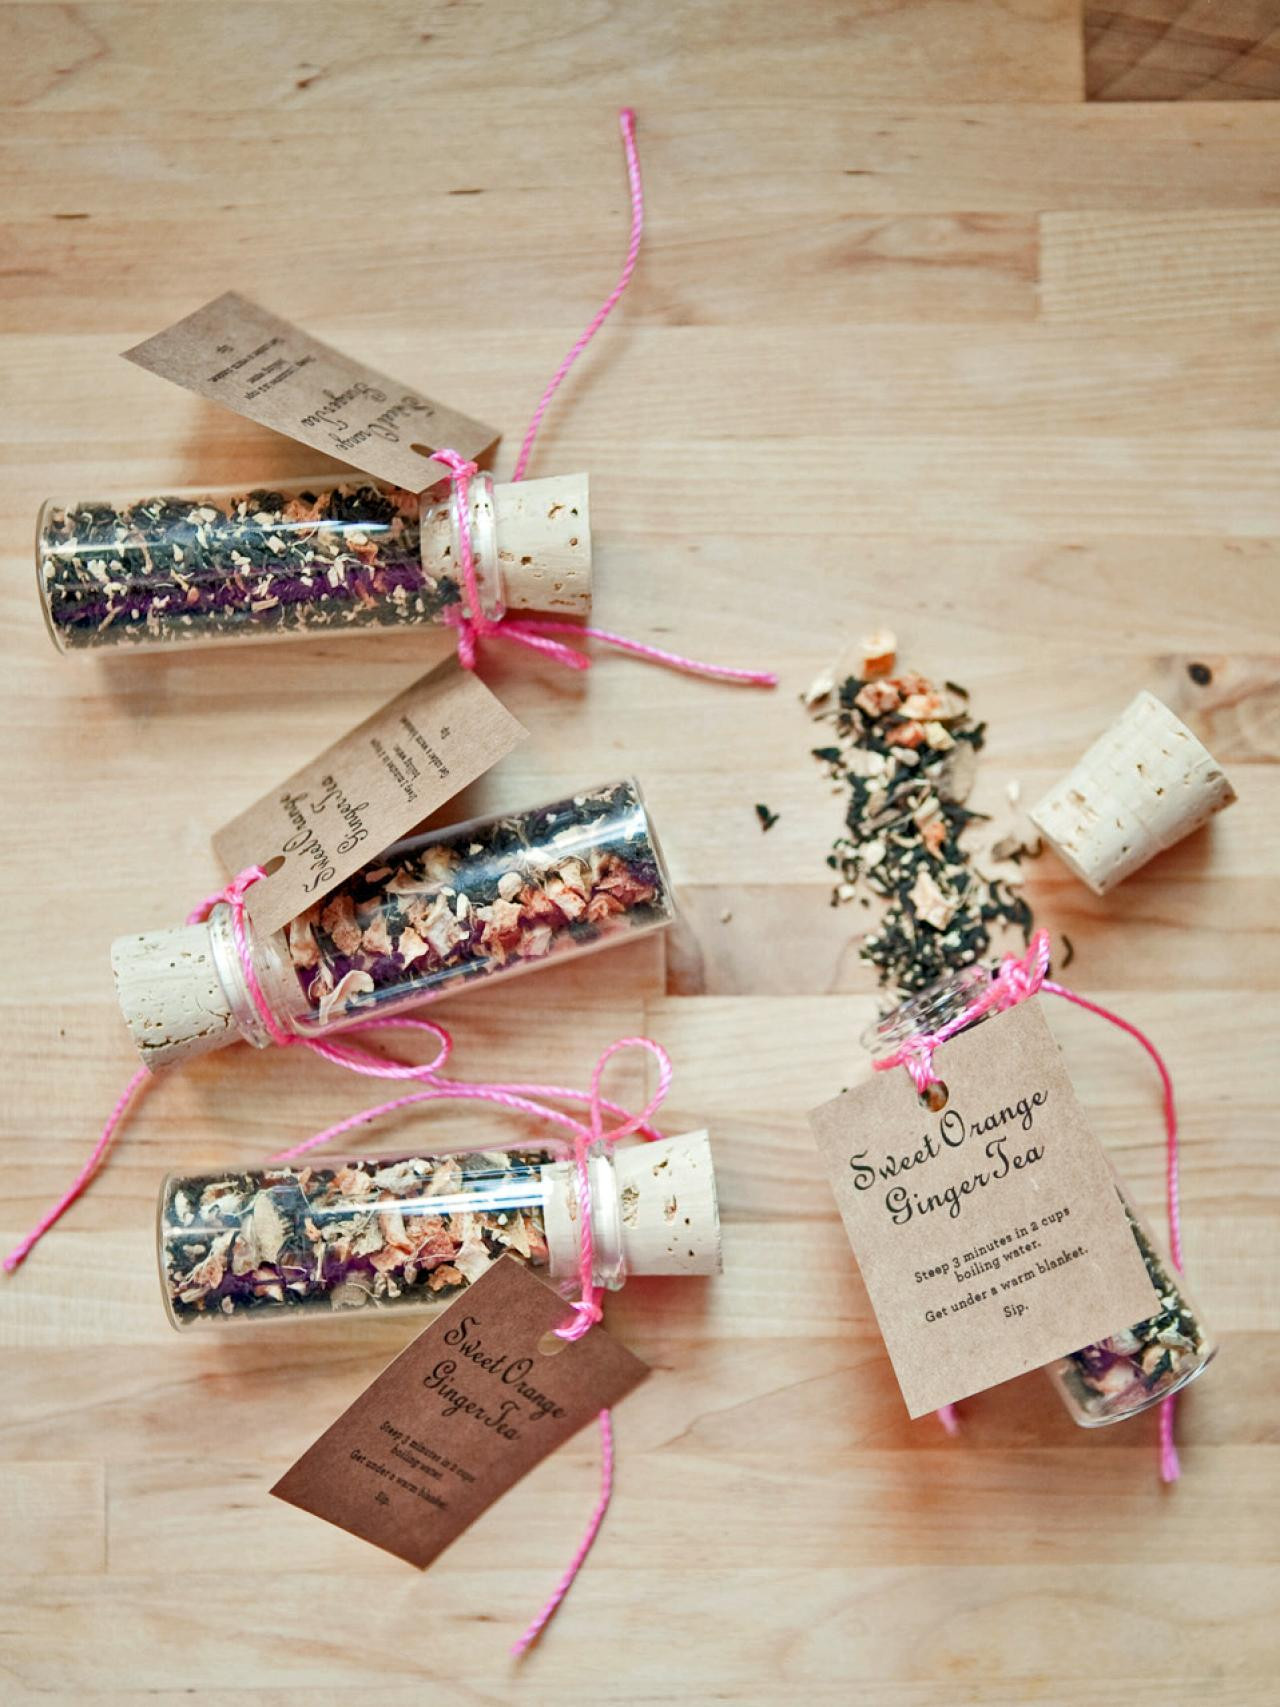 Tea Party Gift Ideas
 30 Festive DIY Holiday Party Favors